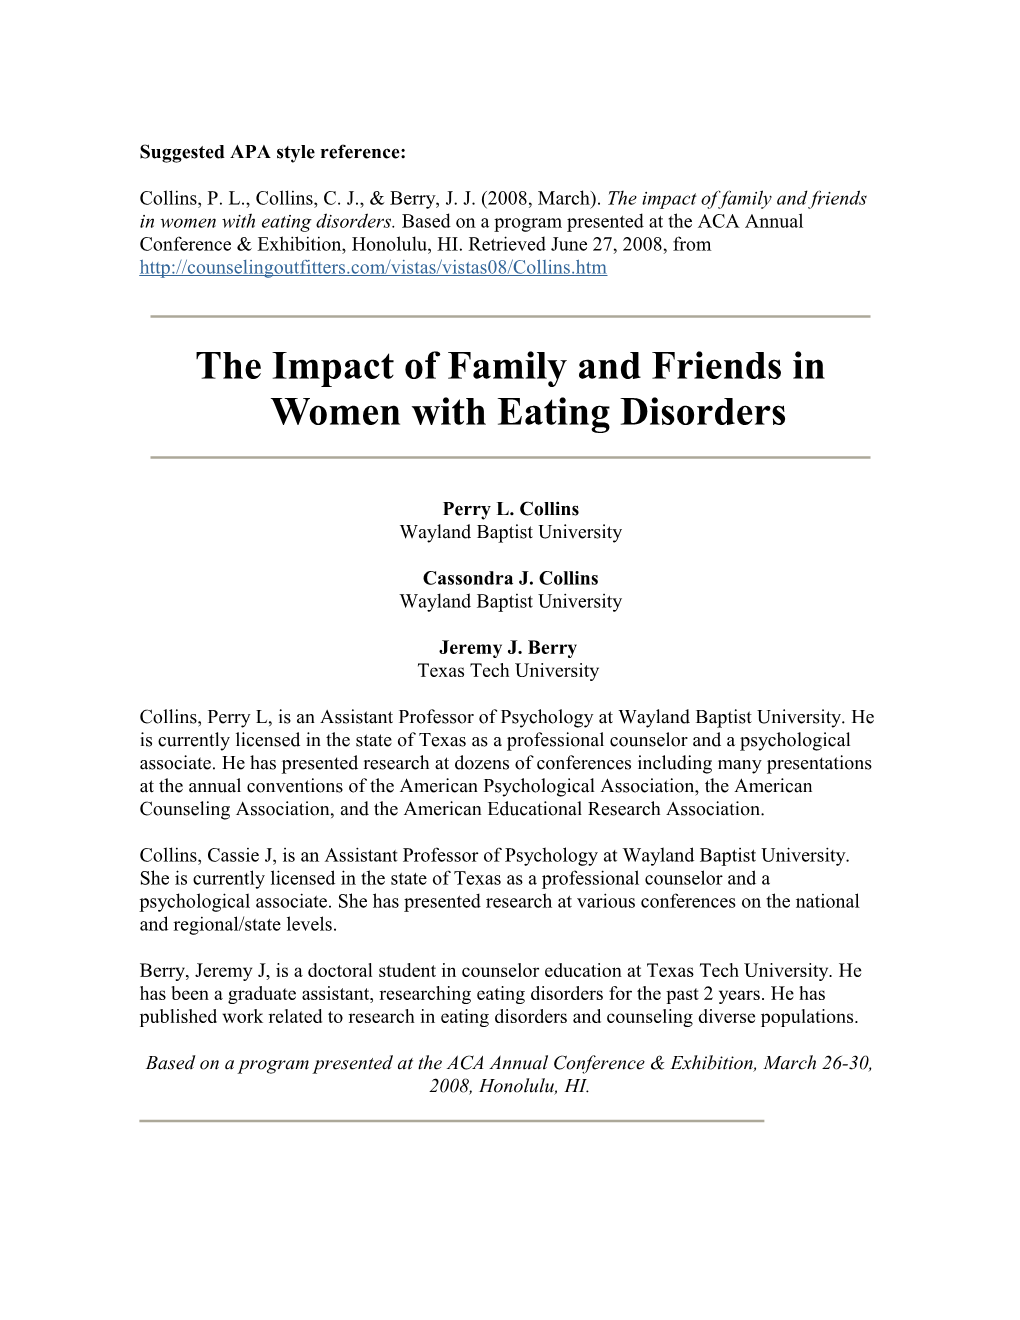 The Impact of Family and Friends in Women with Eating Disorders